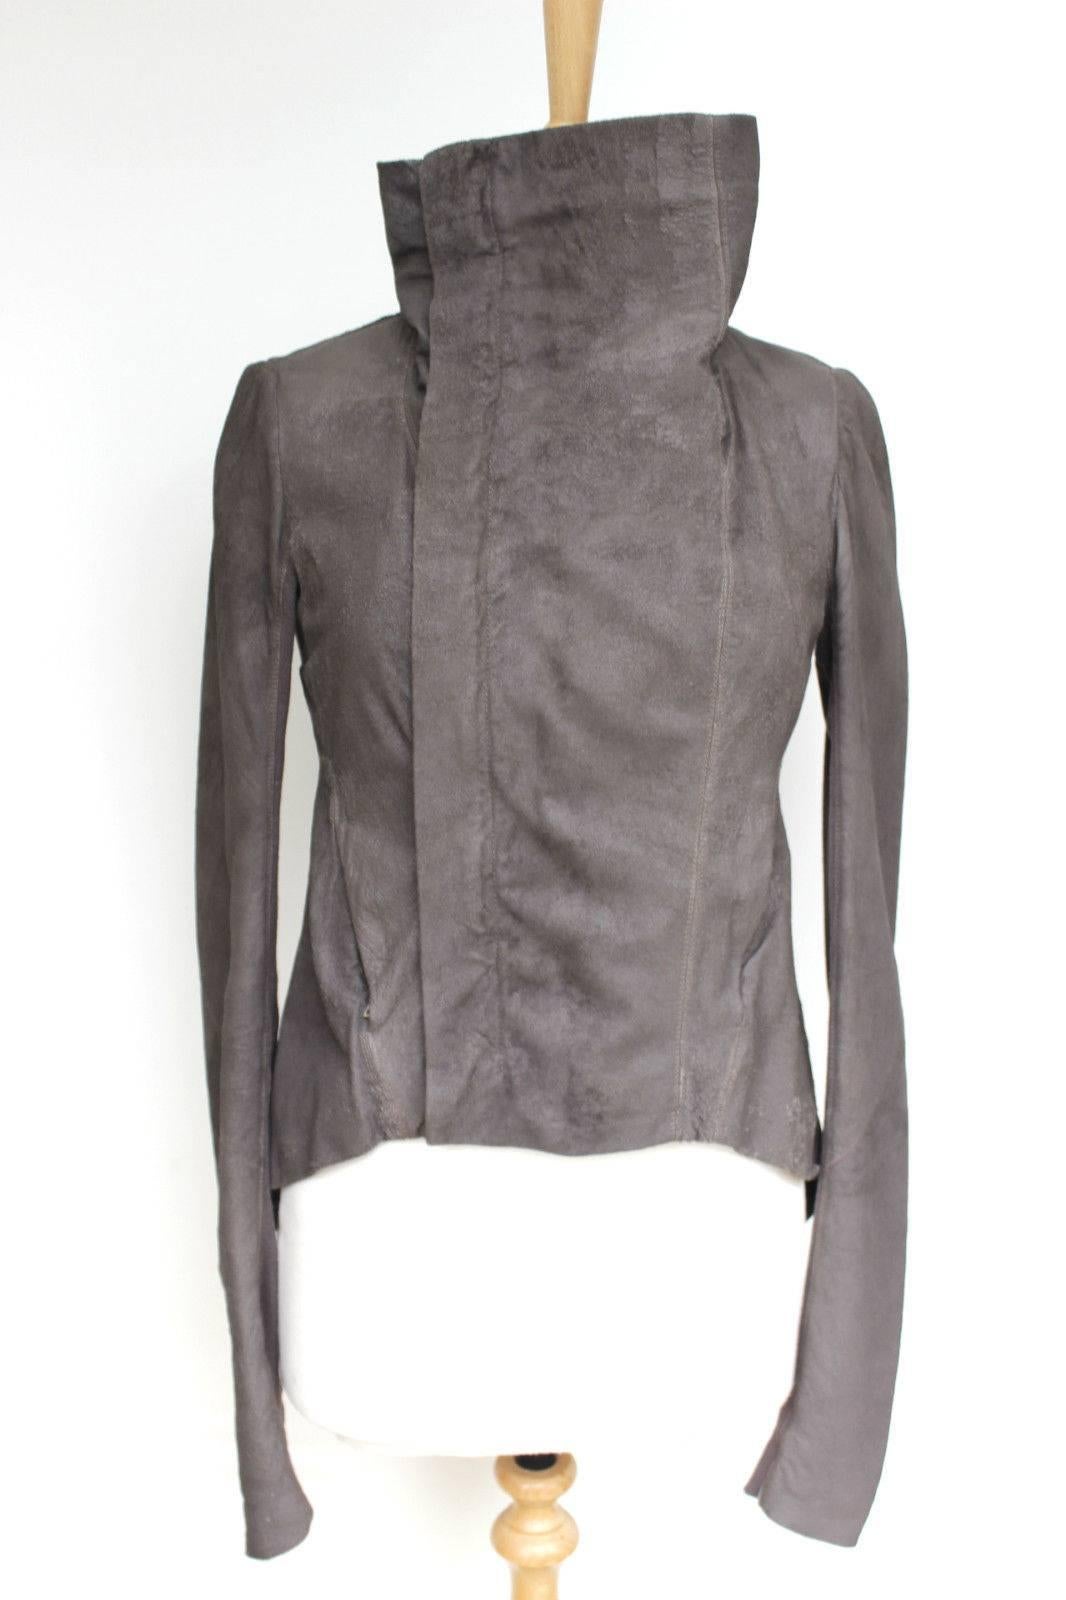 Rick Owens Celebrity Taupe brown blistered washed leather jacket UK 10

Crafted of distressed lambskin, this taupe peplum biker jacket adds Gothic elegance to all your looks. 
Tailored with fitted back panels that taper to a double tailed peplum at